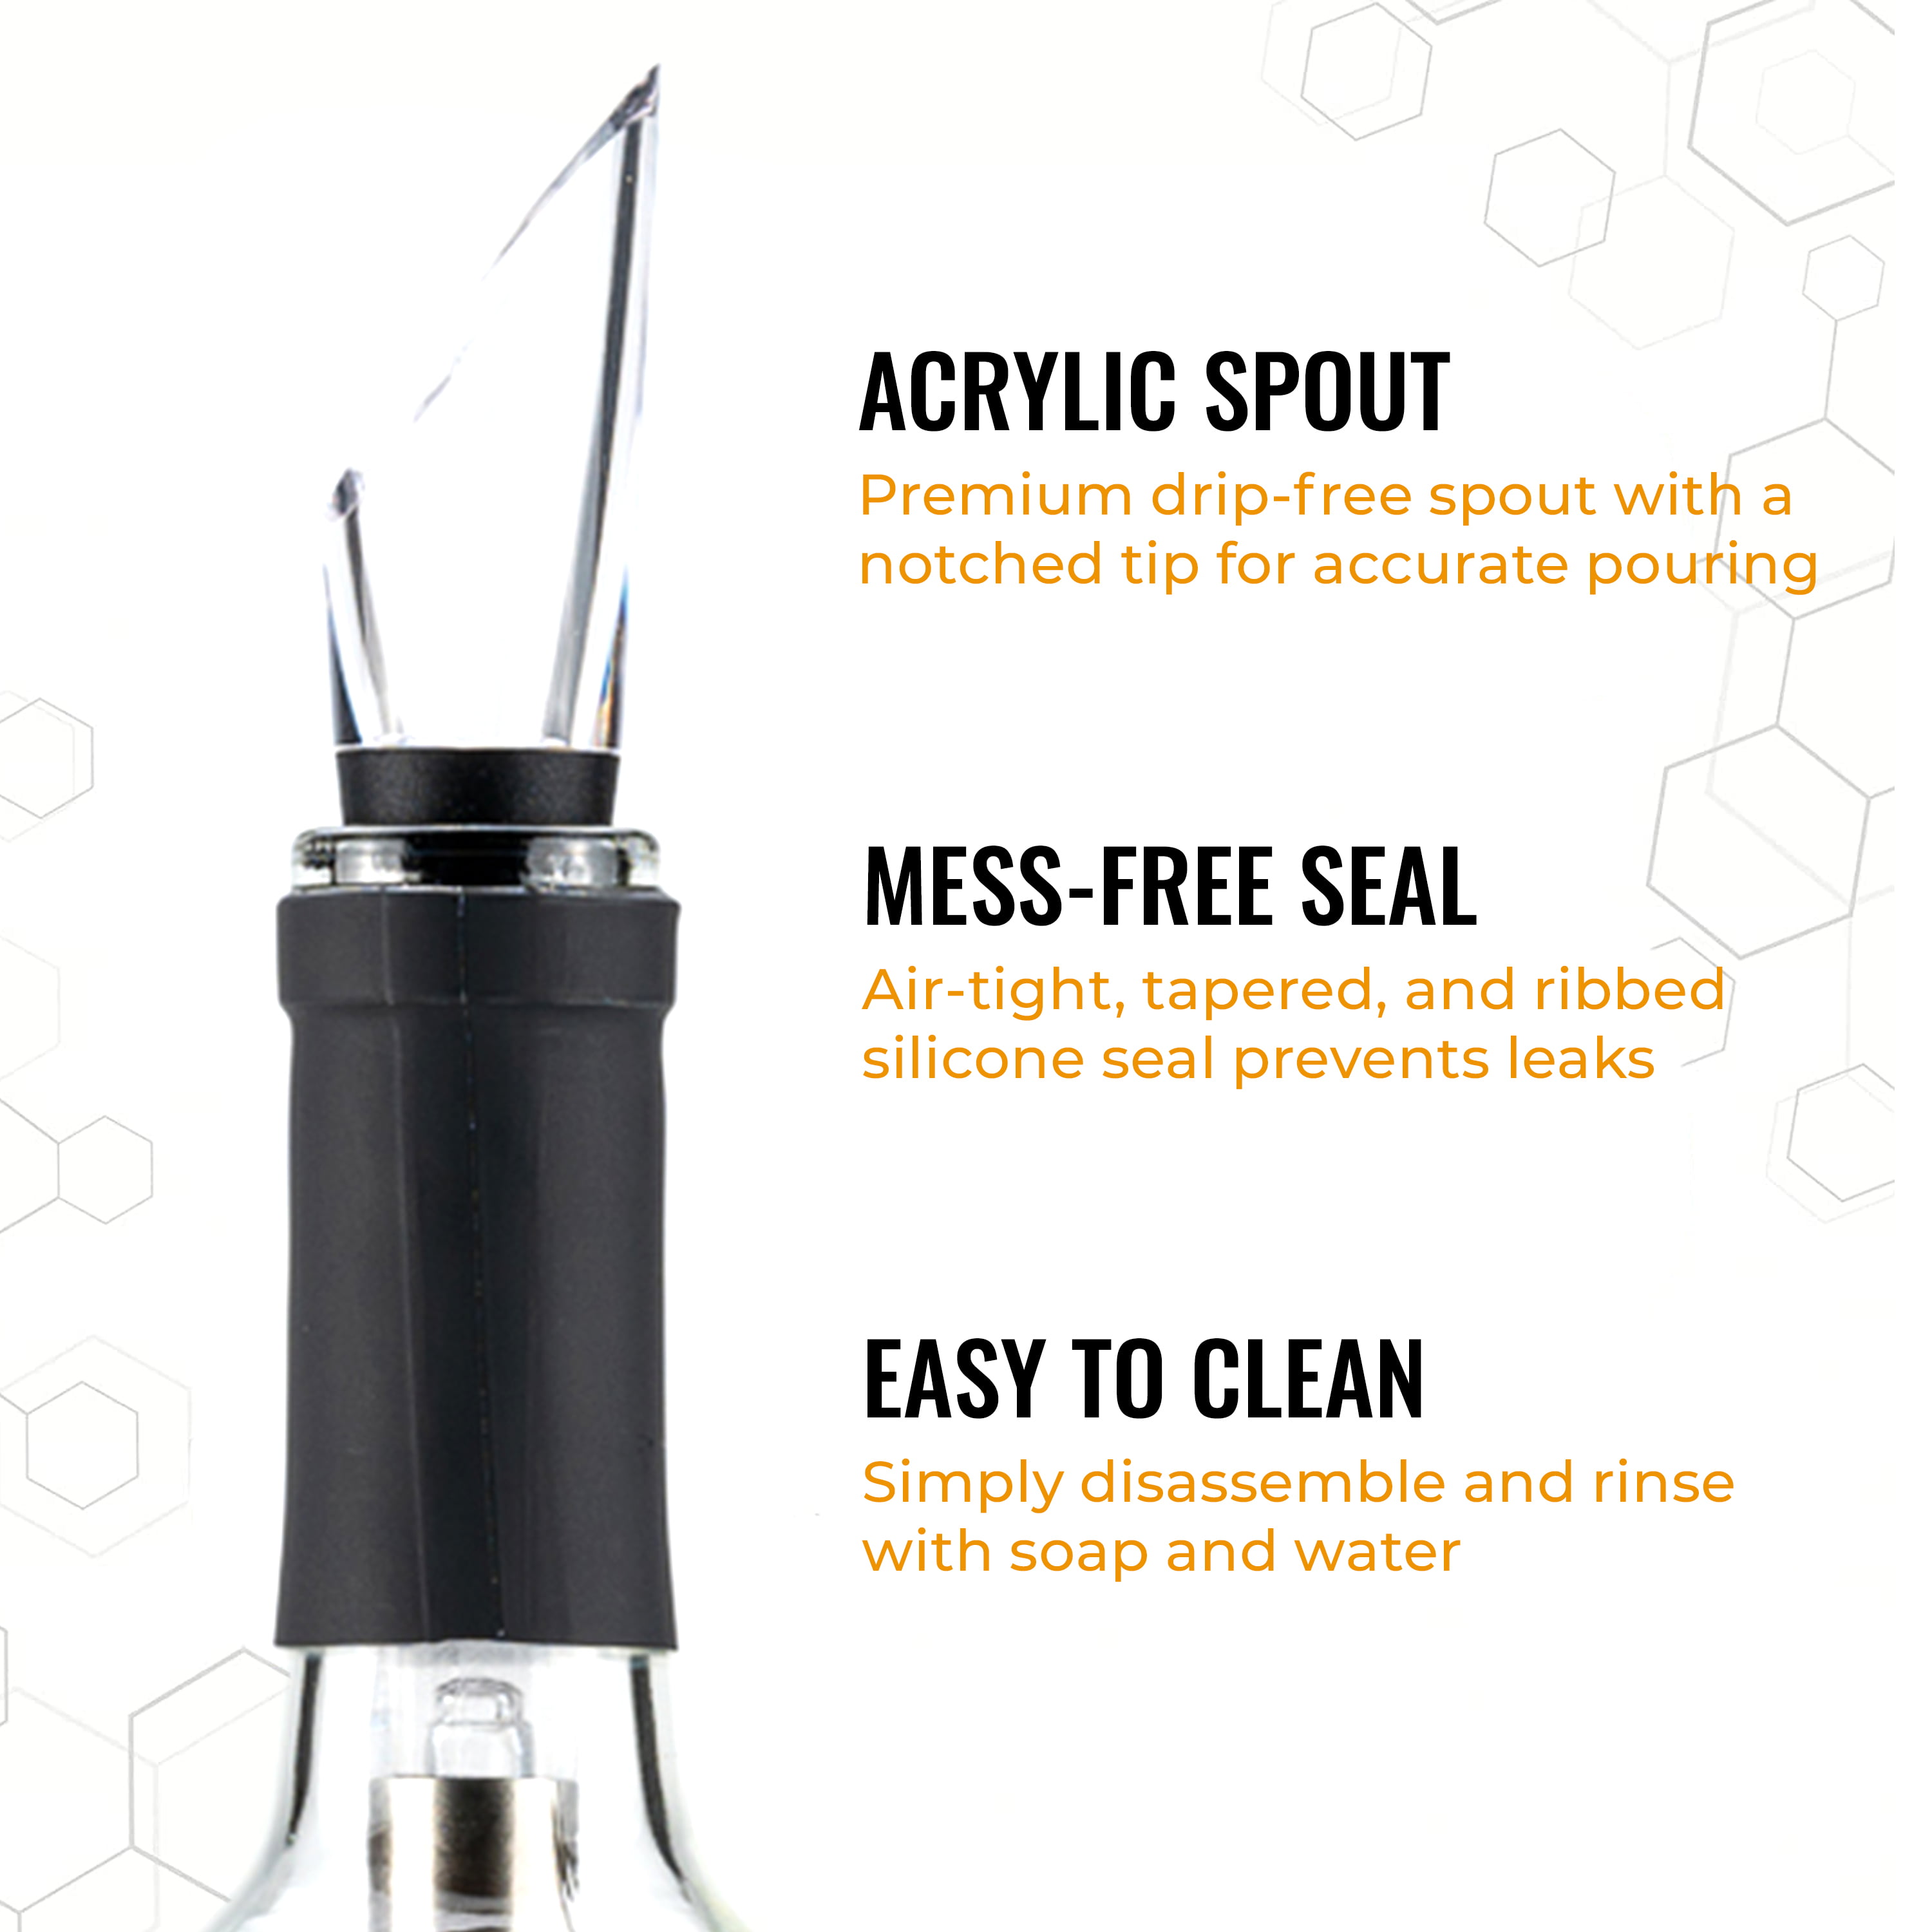 Corkcicle Air 4-in-1 Chiller, Aerator, Pourer, Stopper Wine Gadget Review  on Vimeo